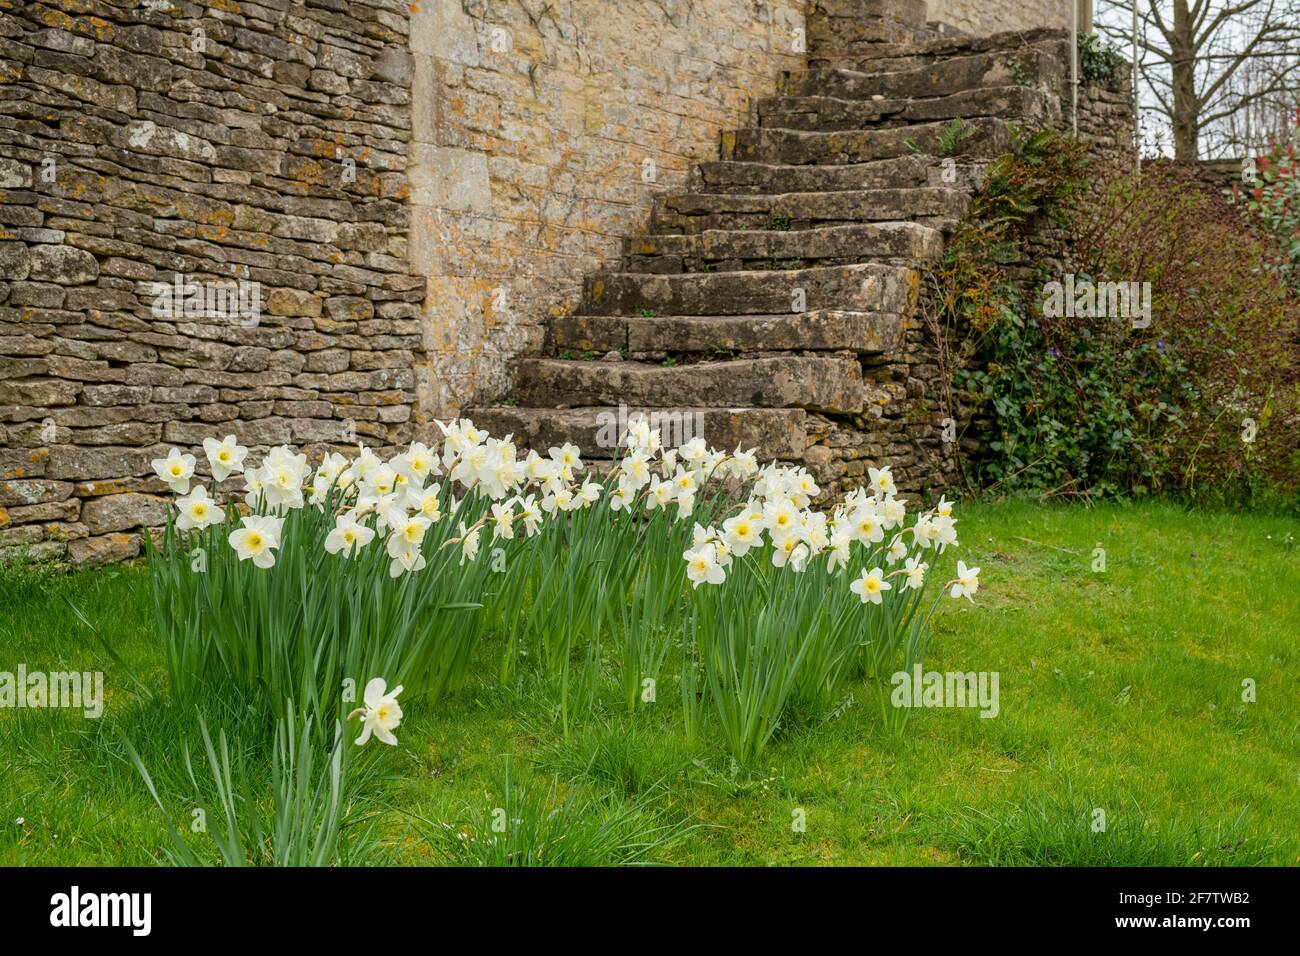 Spring daffodils next to stone house steps in the cotswold village of Coln St Dennis, Gloucestershire, Cotswolds, England Stock Photo